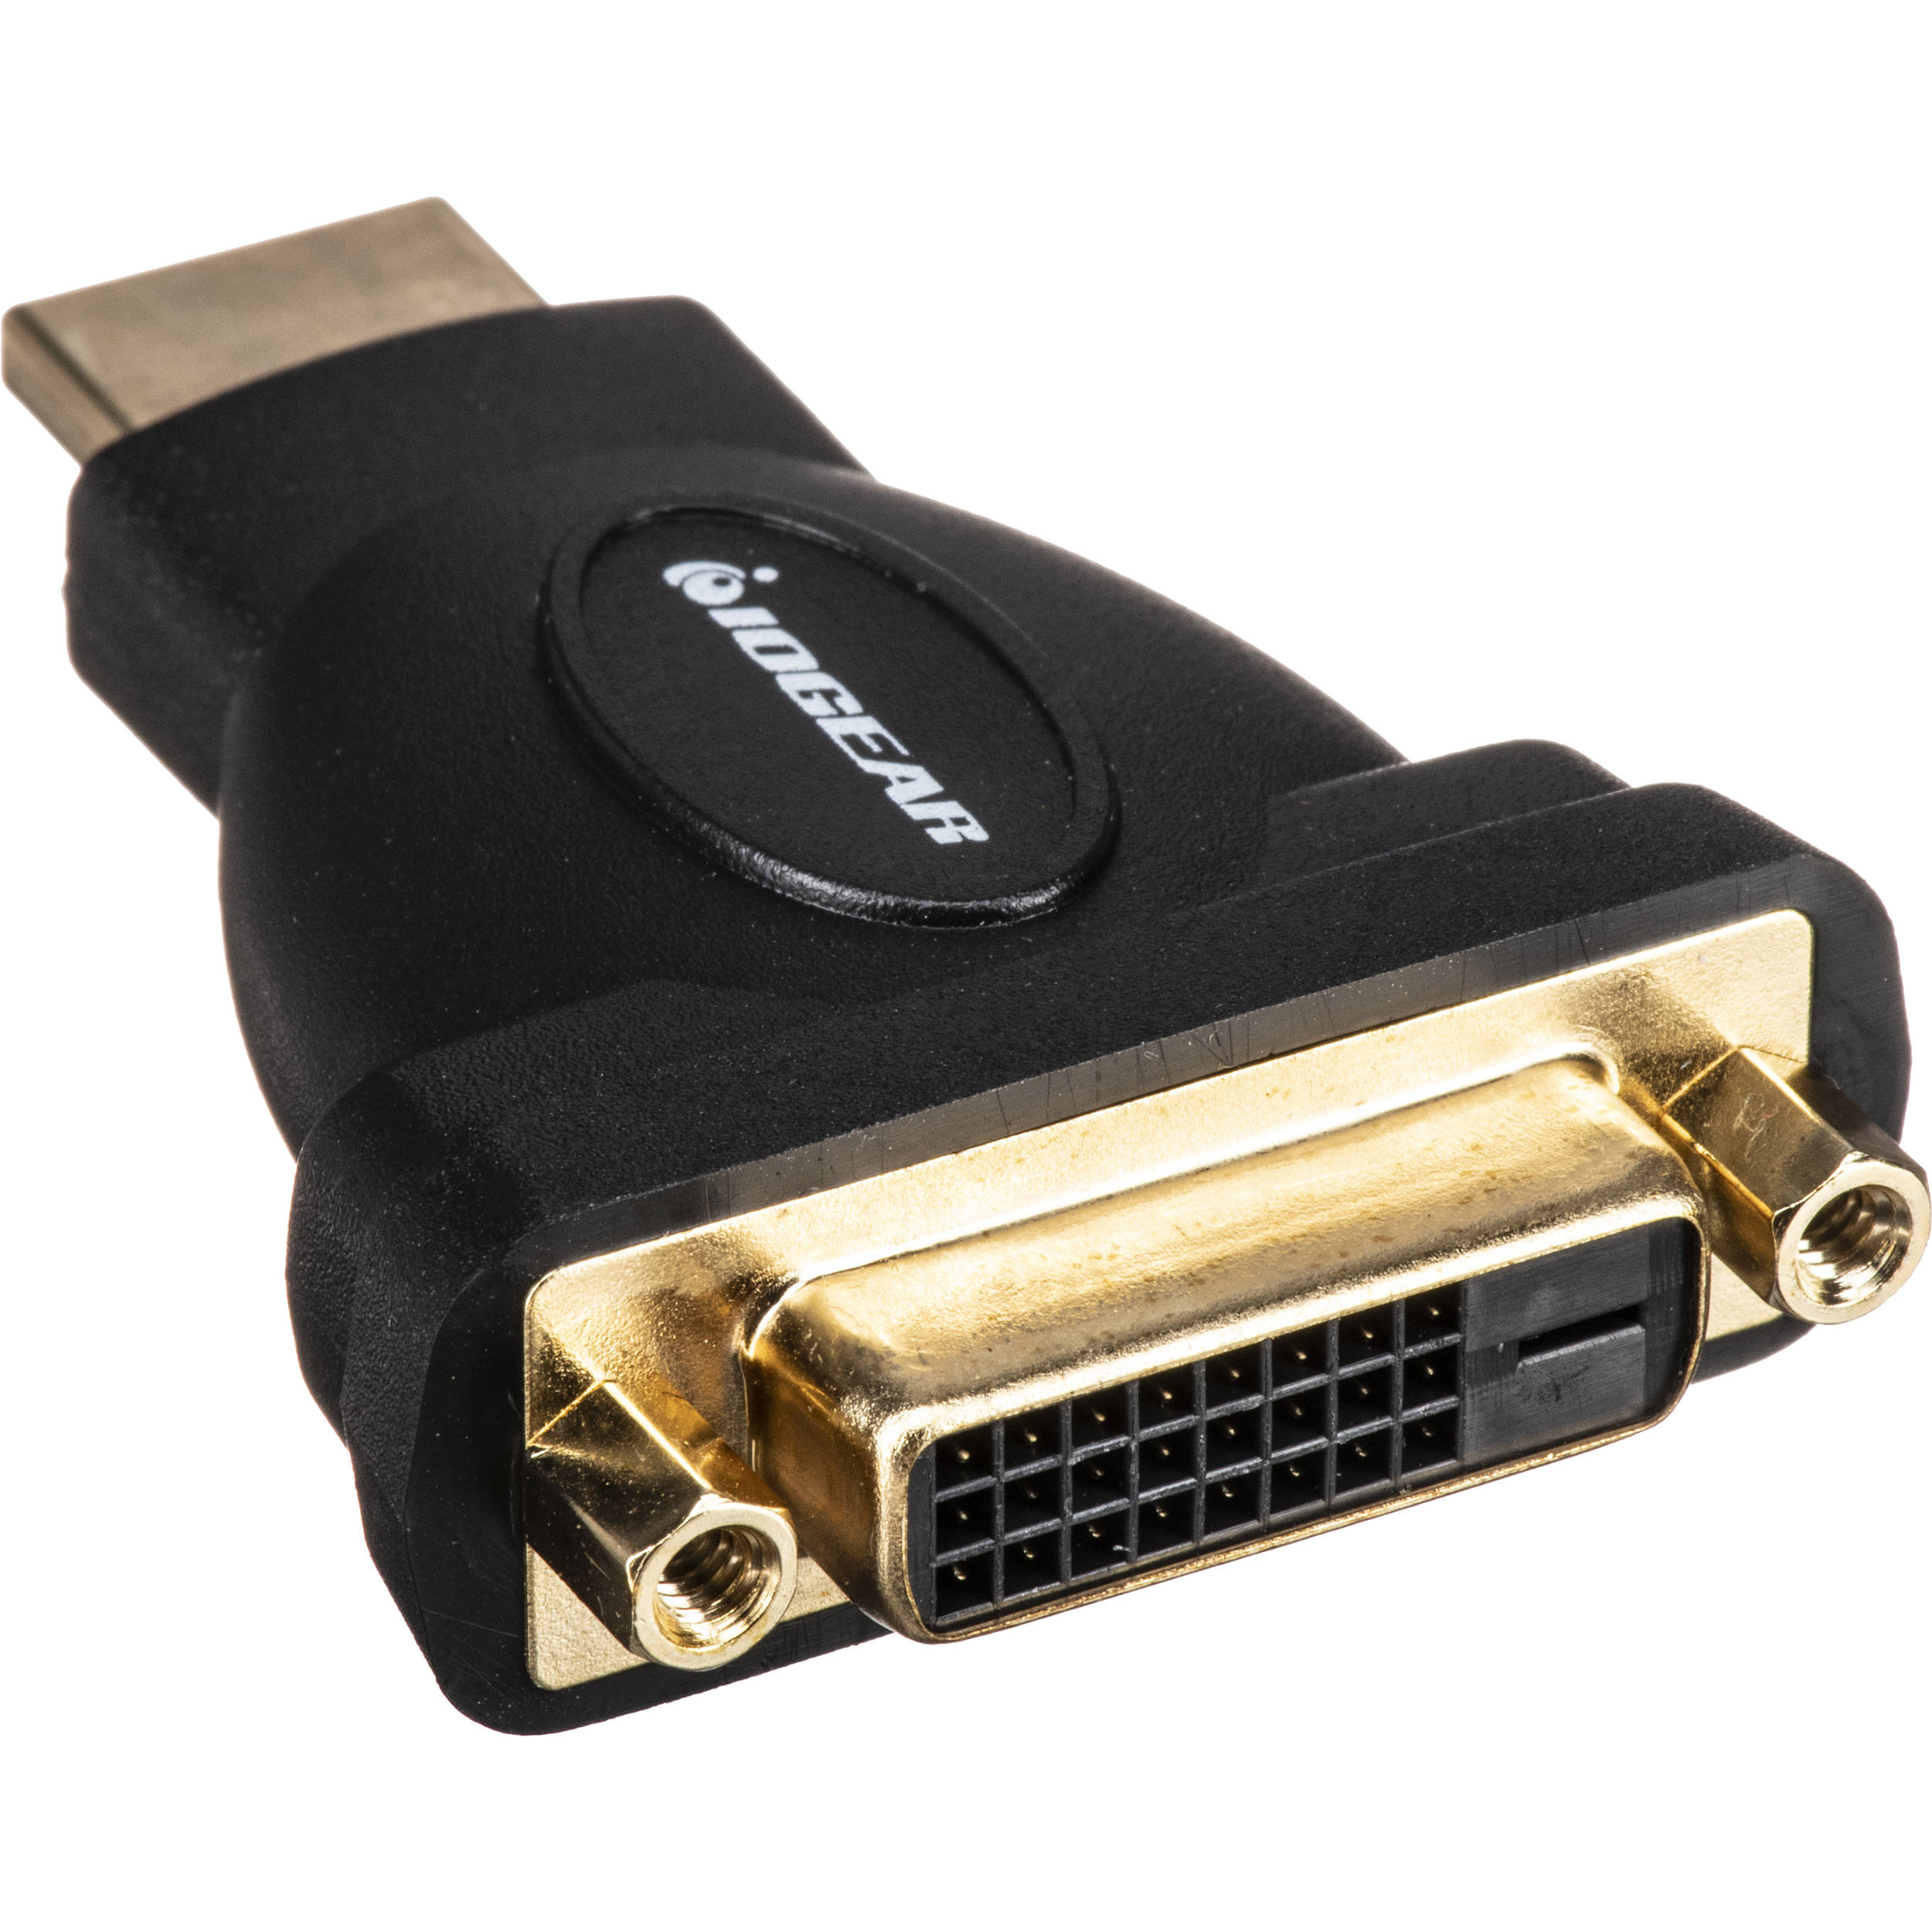 Iogear Dvi To Hdmi Adapter Ghdmdvif B H Photo Video